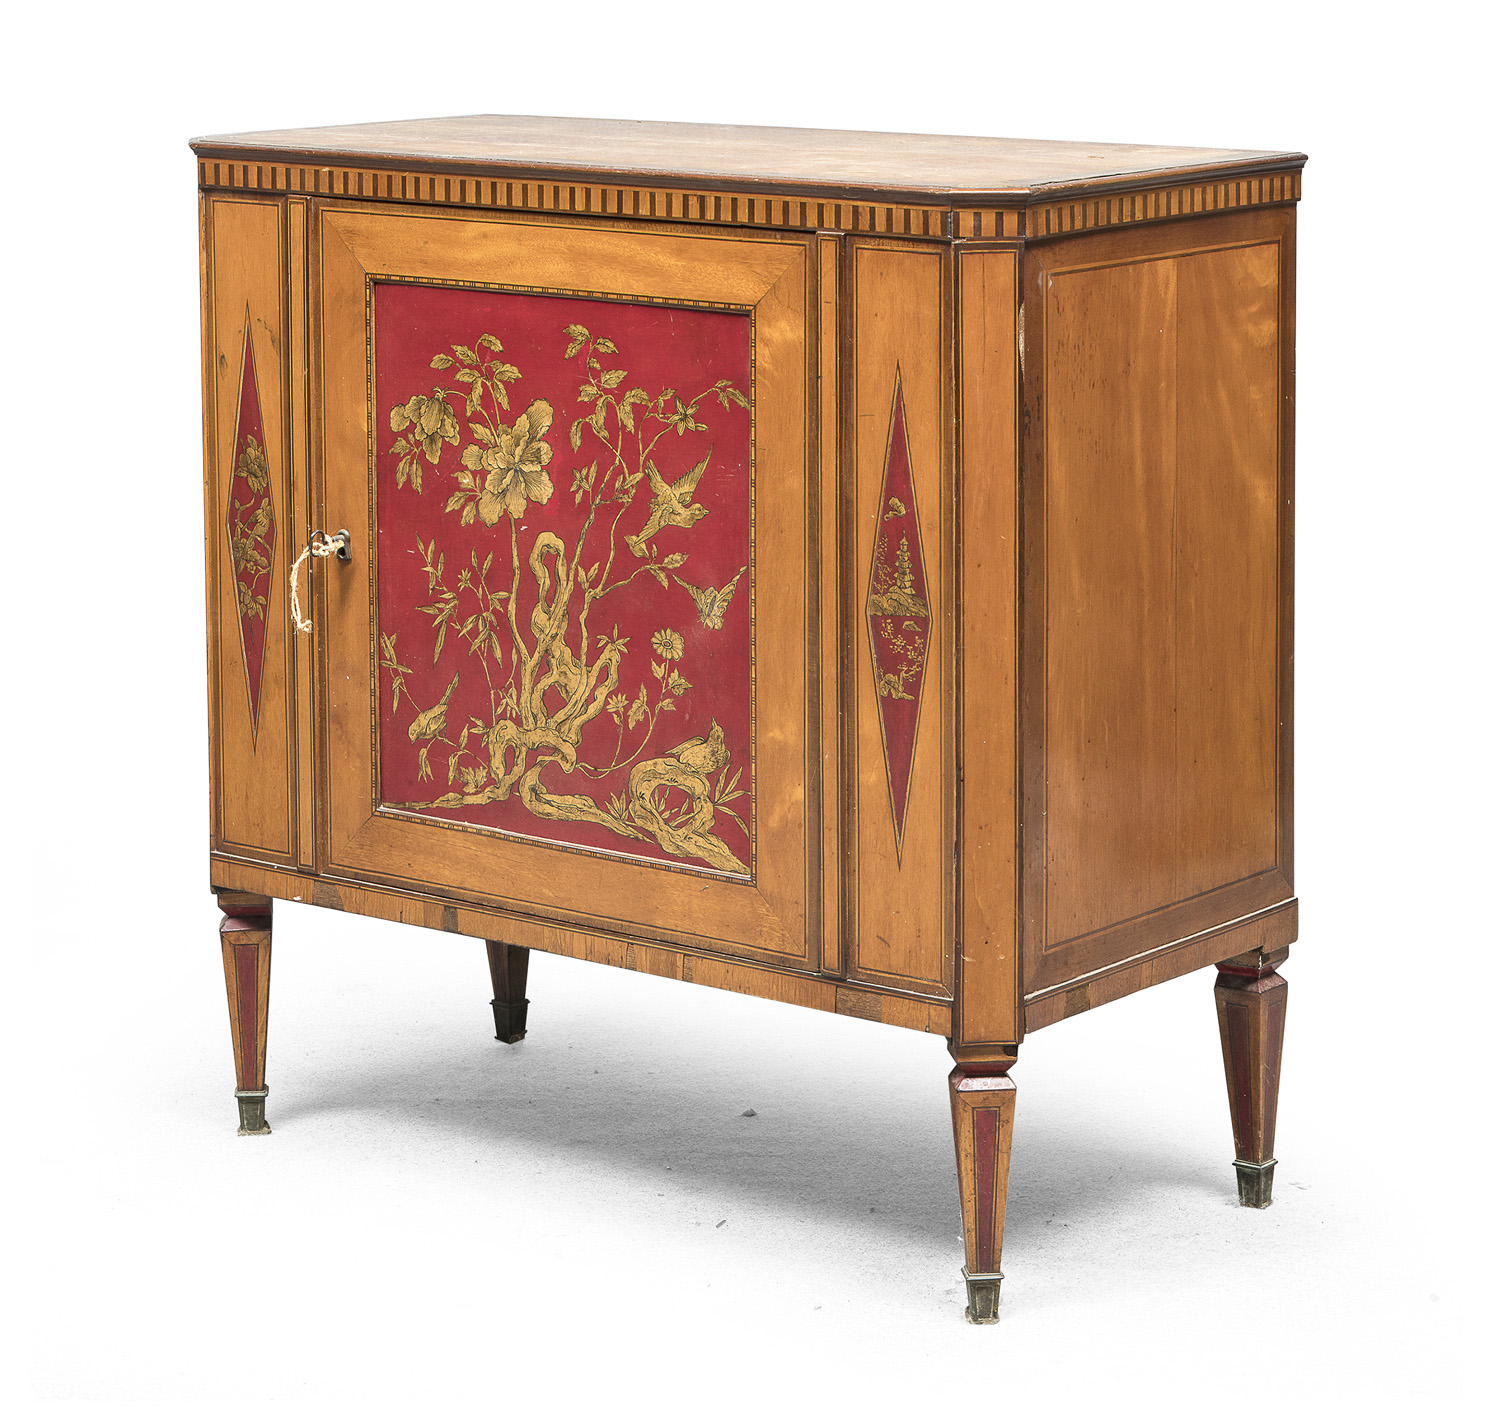 RARE CHINOISERIE BUFFET FRANCE EARLY 19th CENTURY